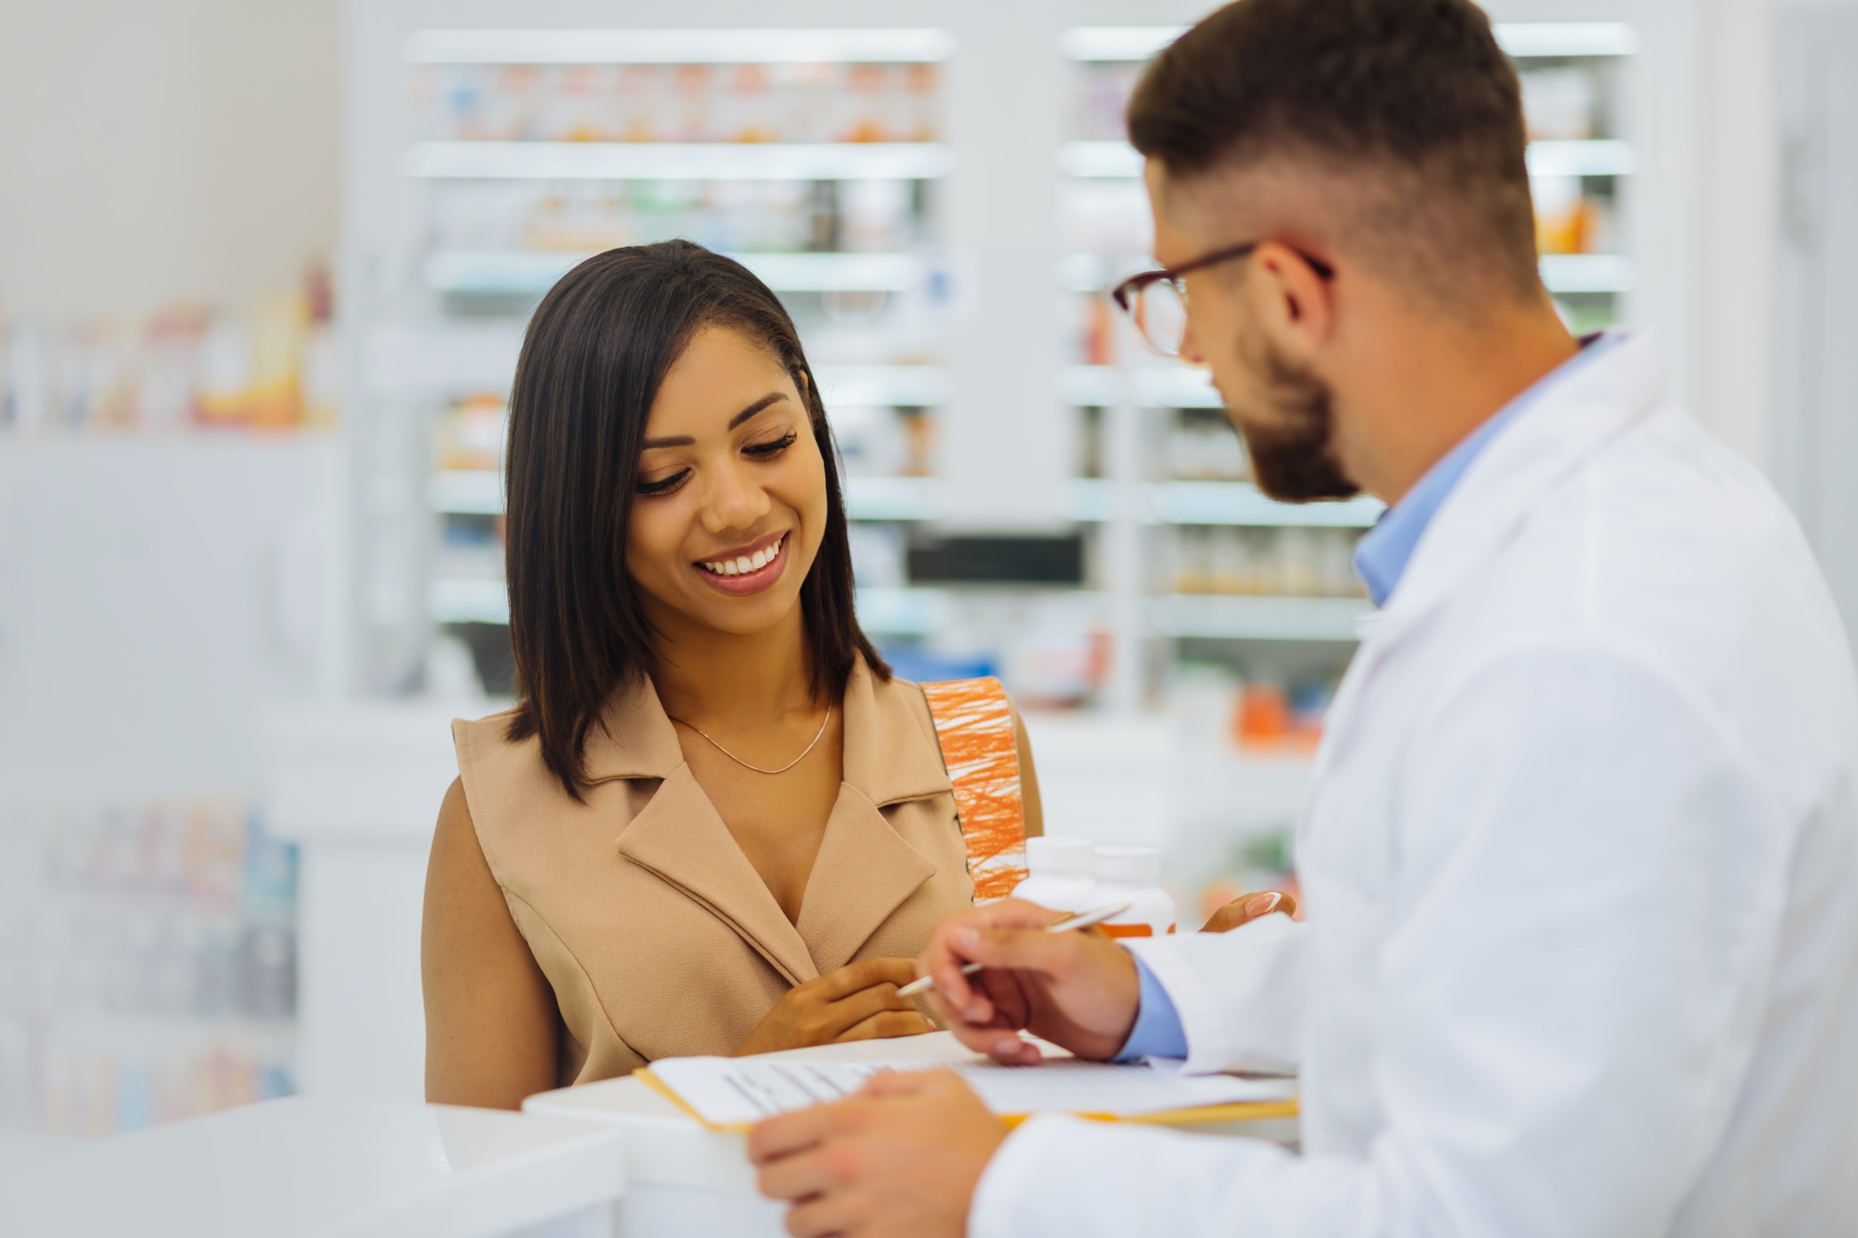 prescribing pharmacist for minor OHIP covered health issues